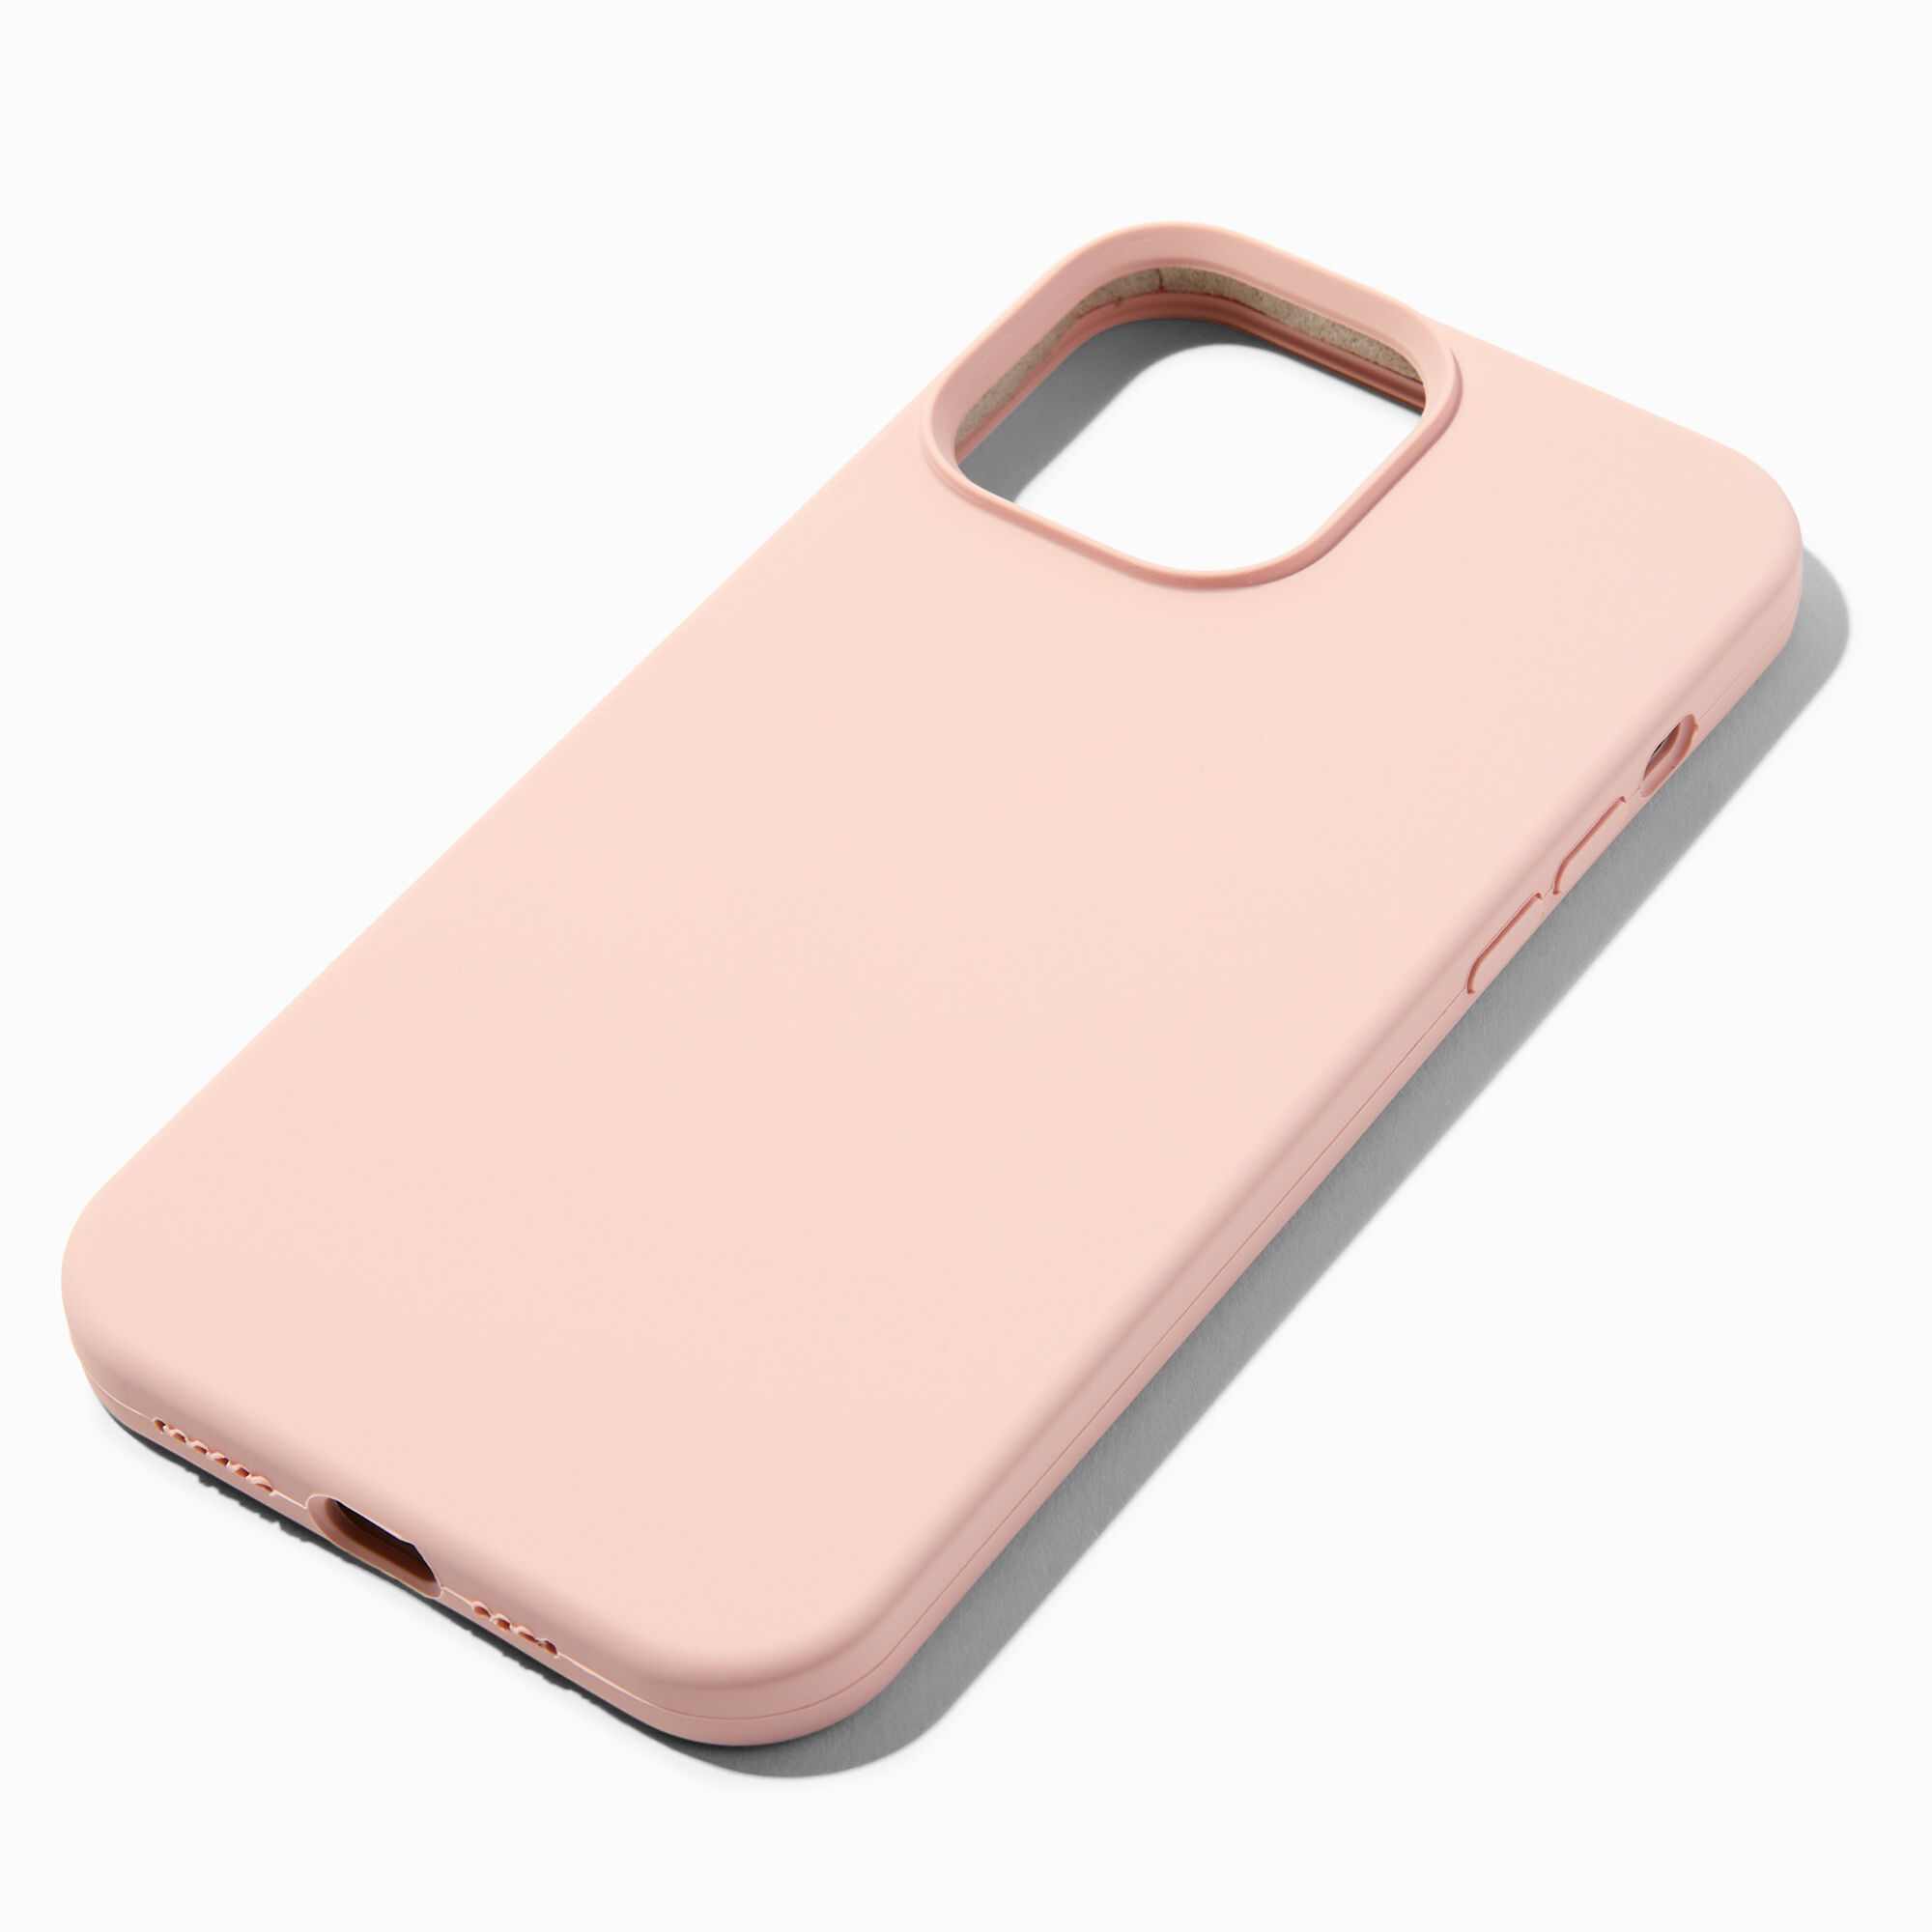 View Claires Solid Blush Silicone Phone Case Fits Iphone 13 Pro Max Pink information